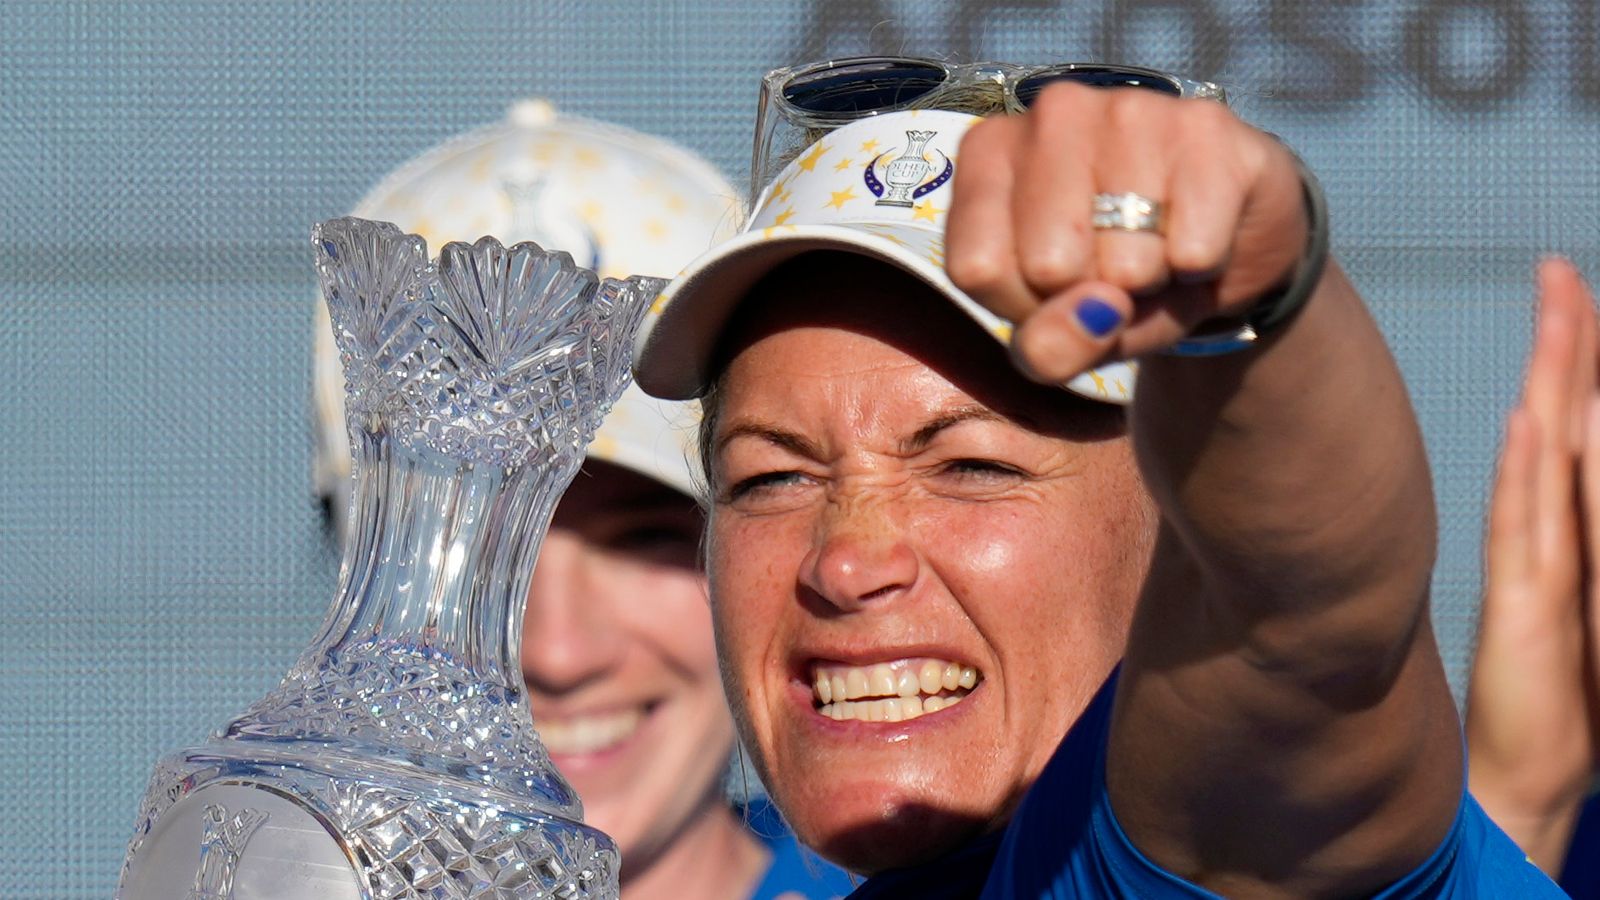 Ryder Cup and Solheim Cup glory celebrated in ‘Europe! Europe!’, a new documentary on Sky Sports